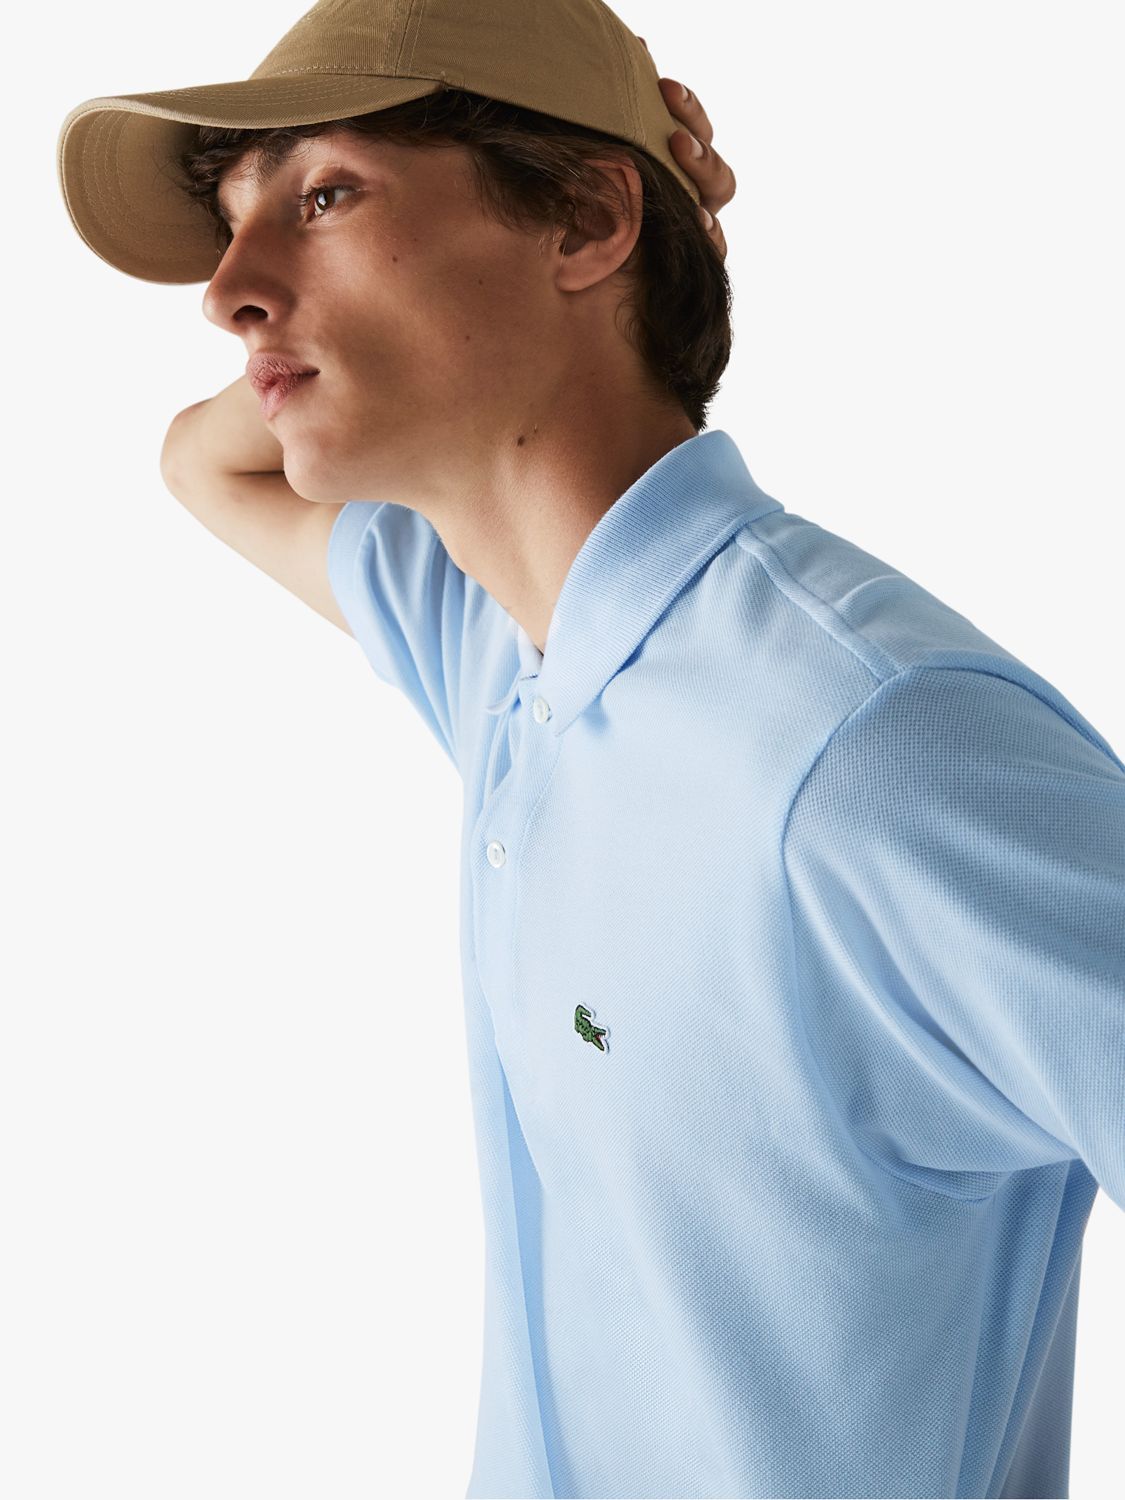 Lacoste Classic Fit Logo Polo Shirt, Blue, S